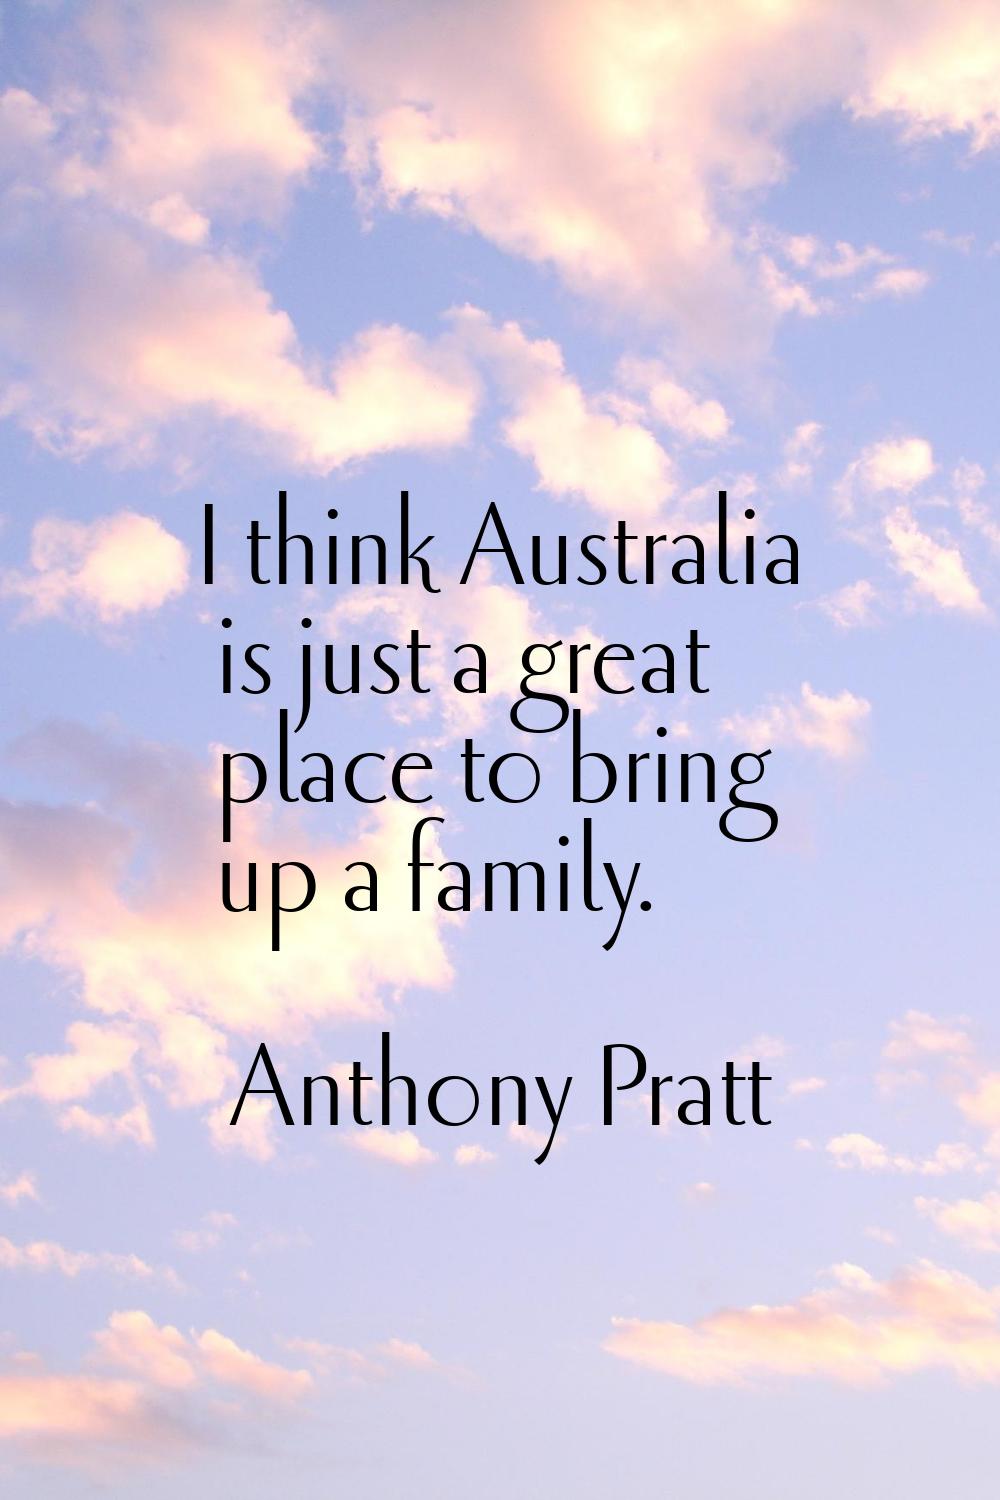 I think Australia is just a great place to bring up a family.